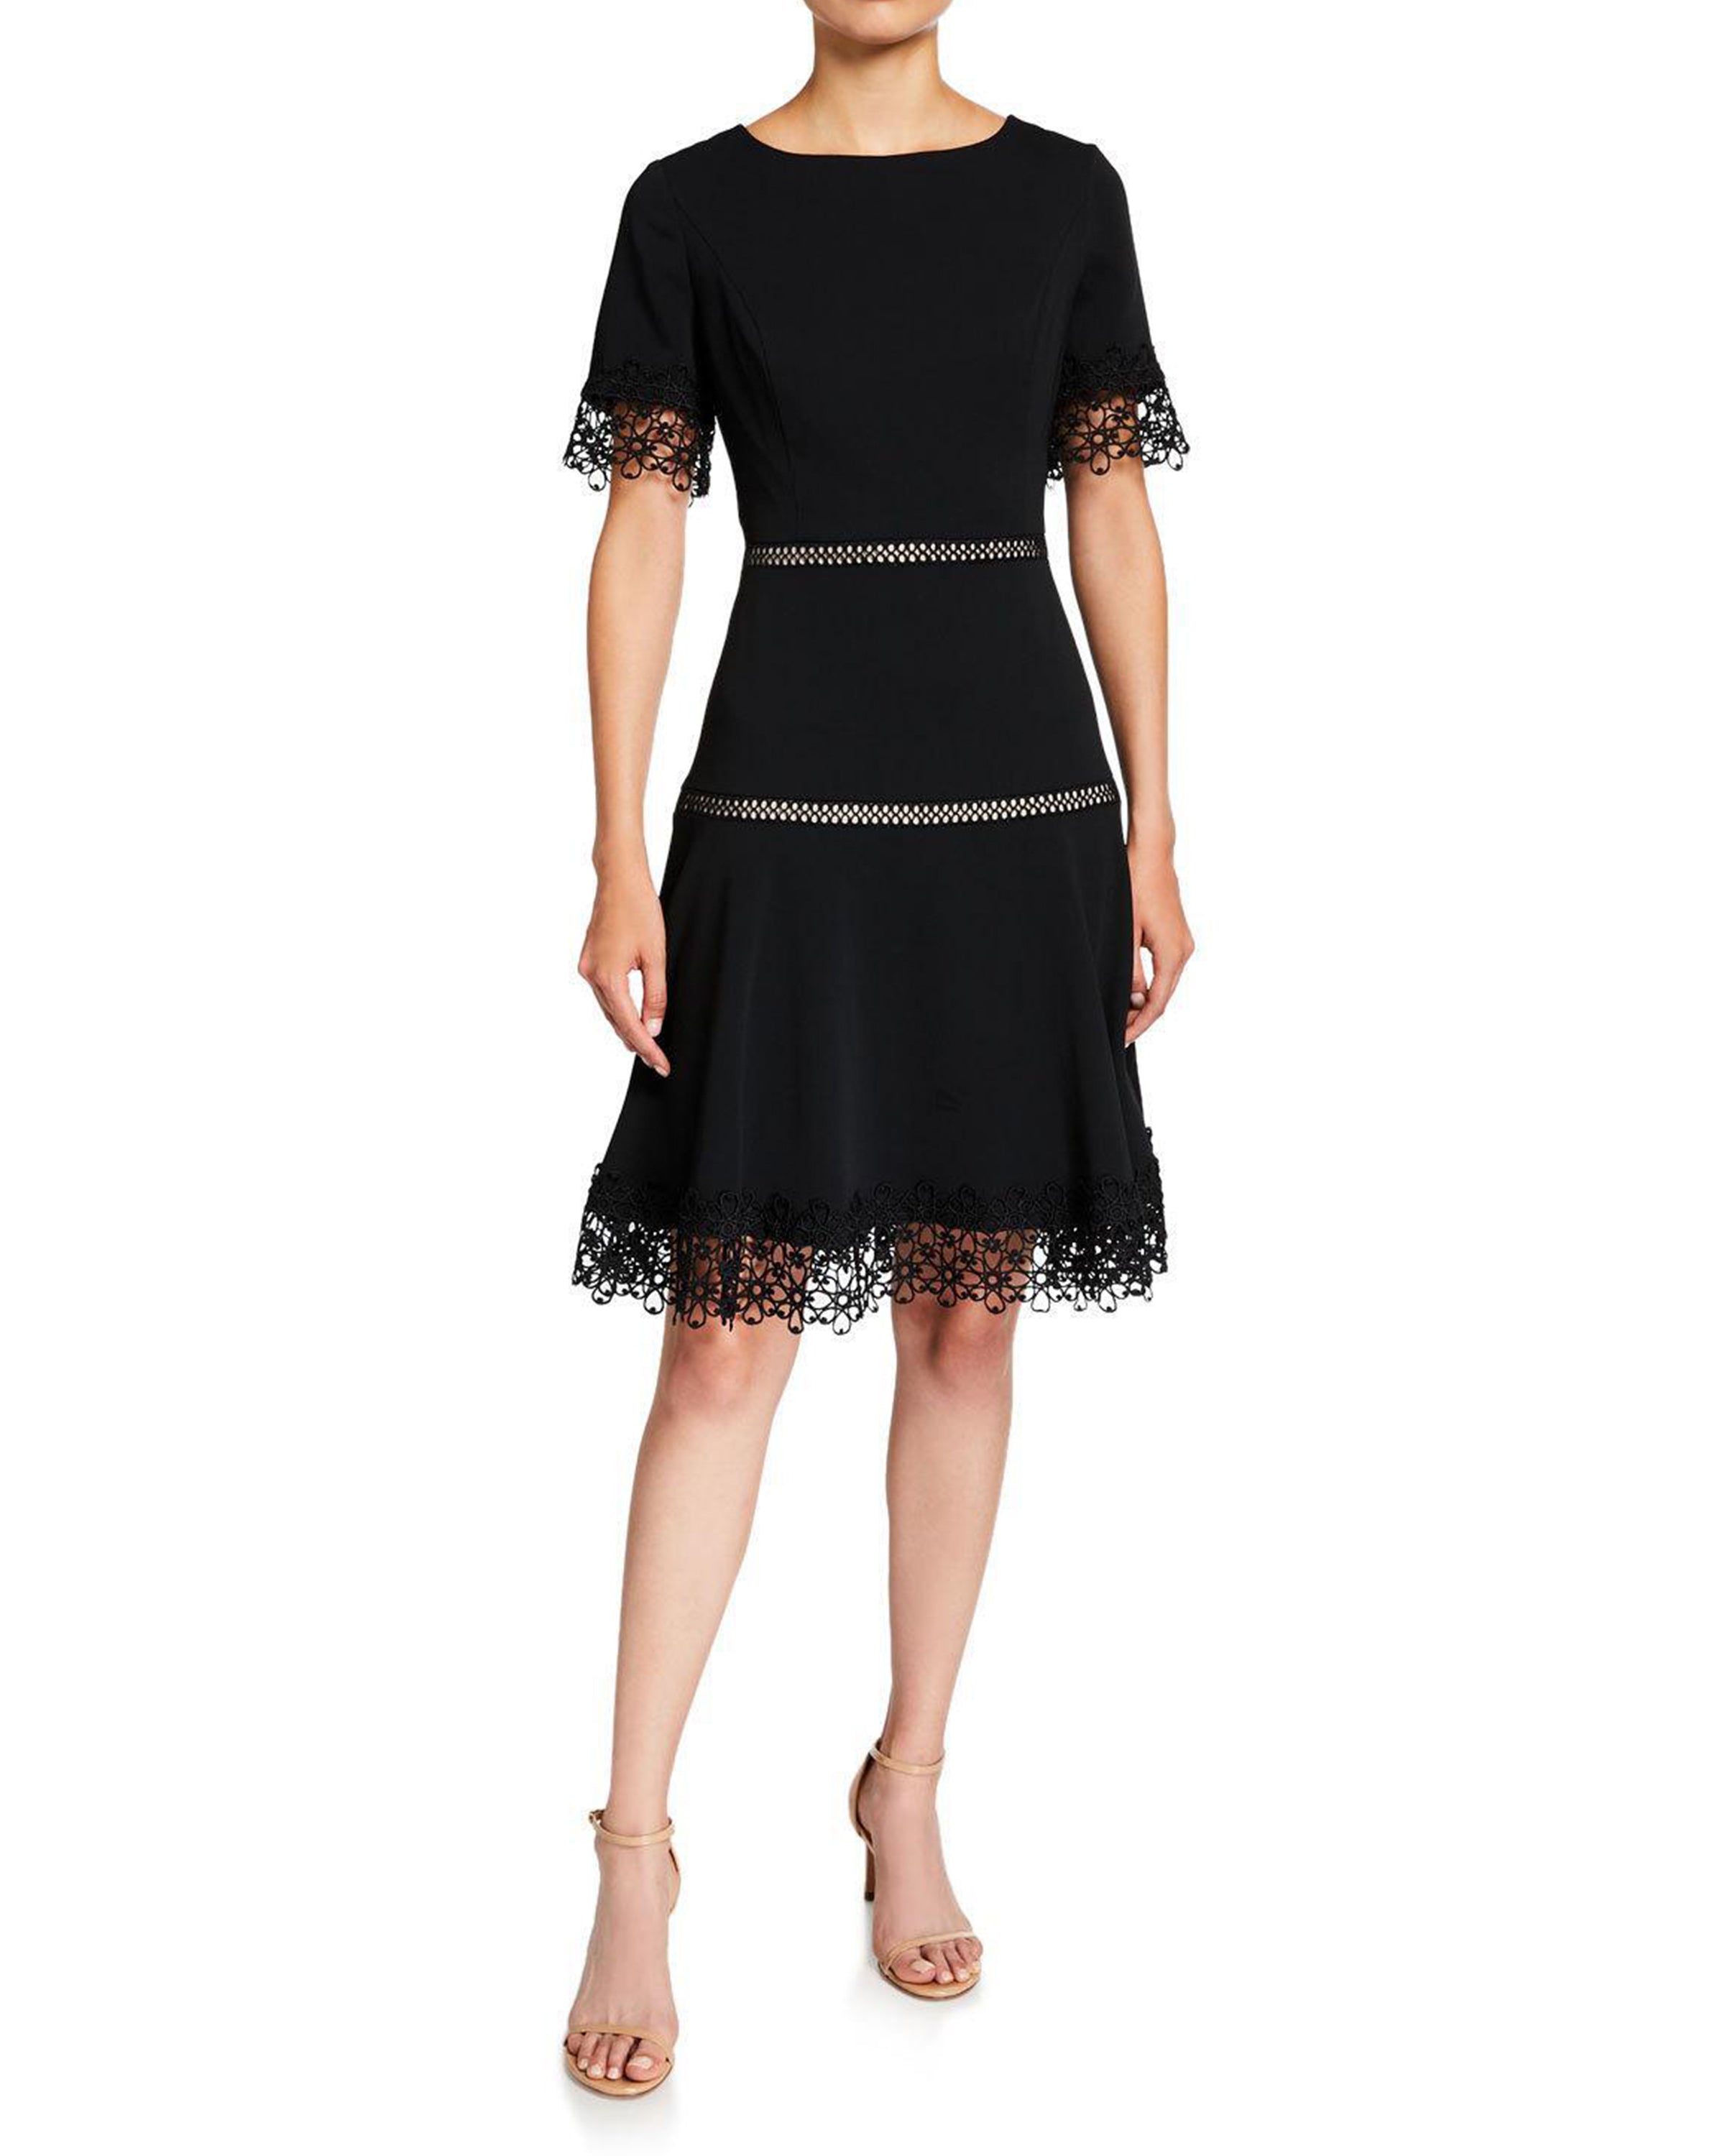 Buy Online Lace Trim Crepe Fit & Flare Dress for Women   Shani